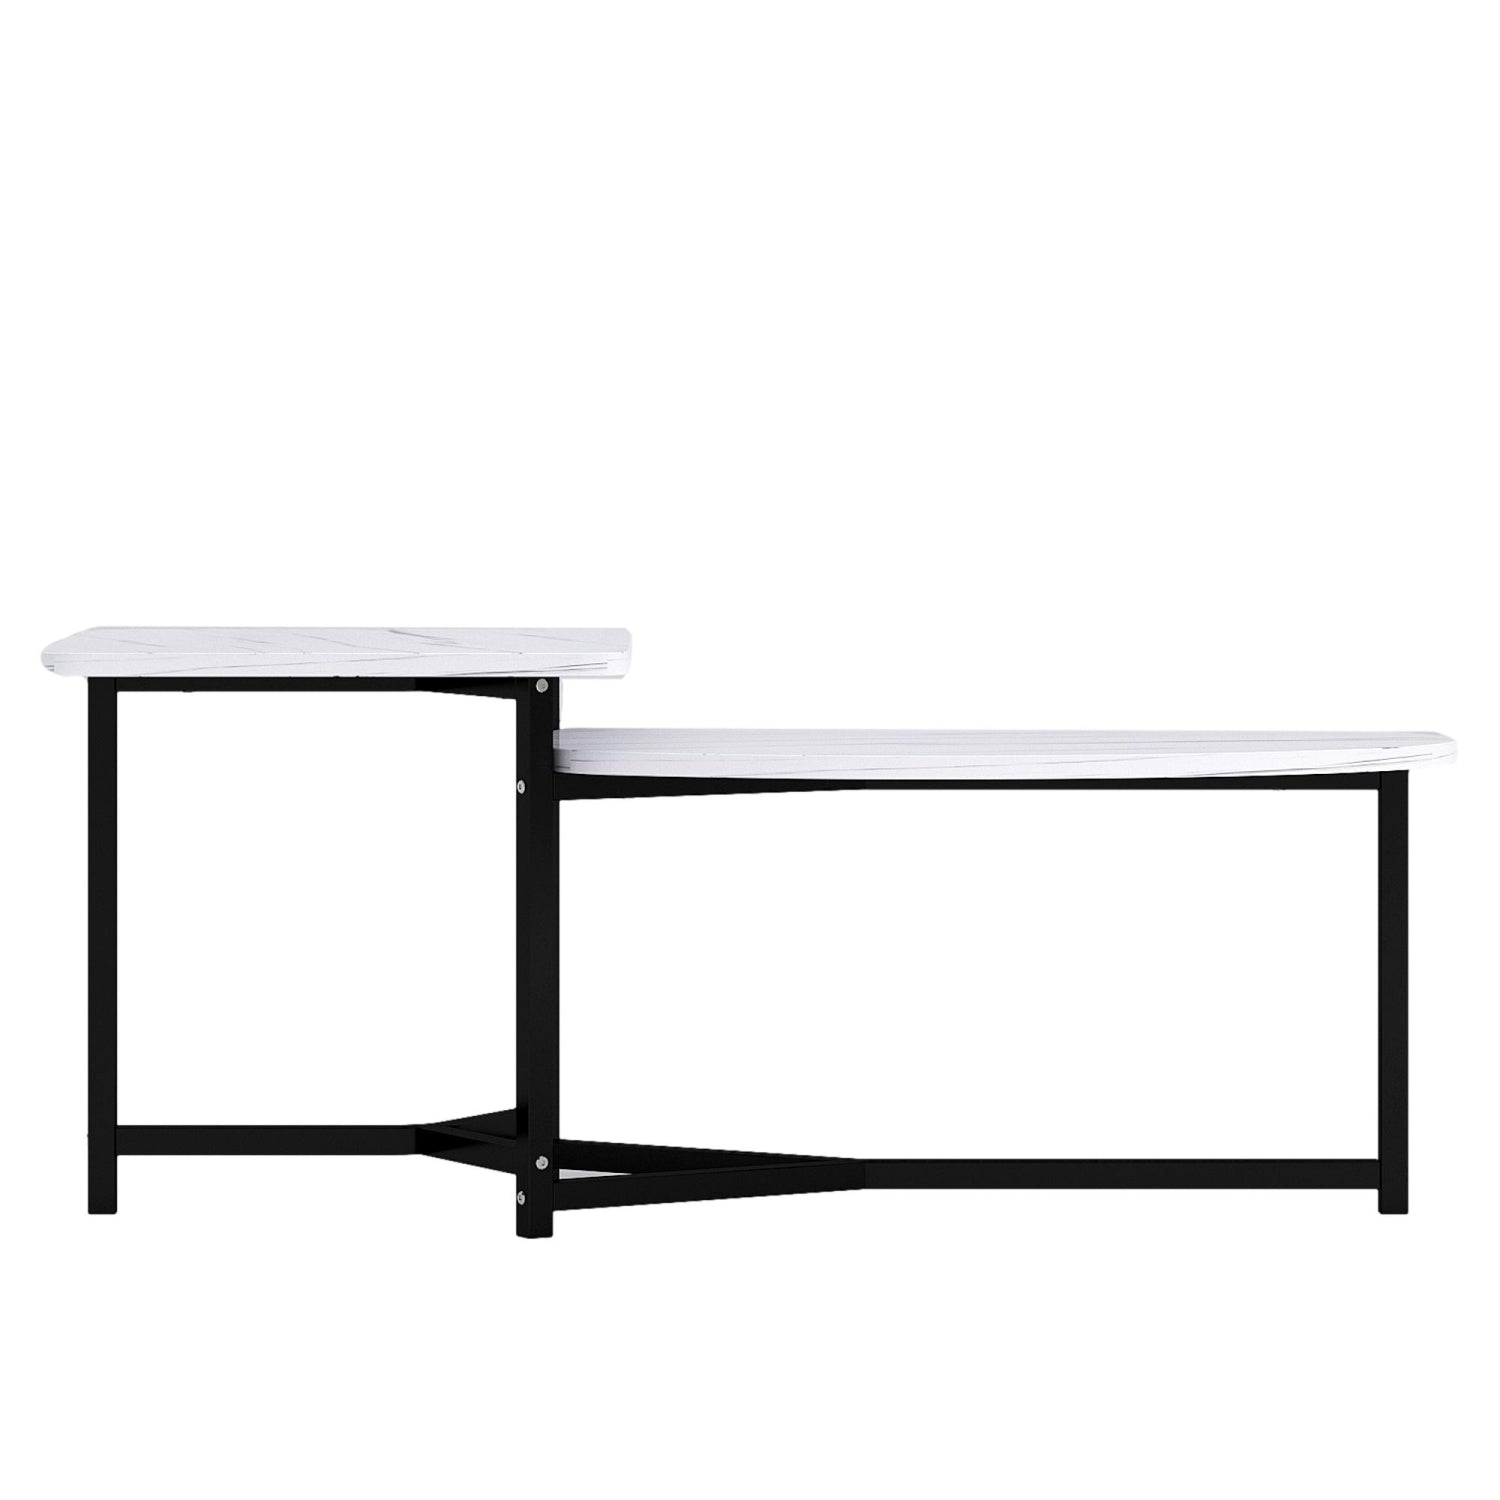 ViscoLogic LUXEM Contemporary Unique Nested Coffee Table, Center Table For Living Room (White)